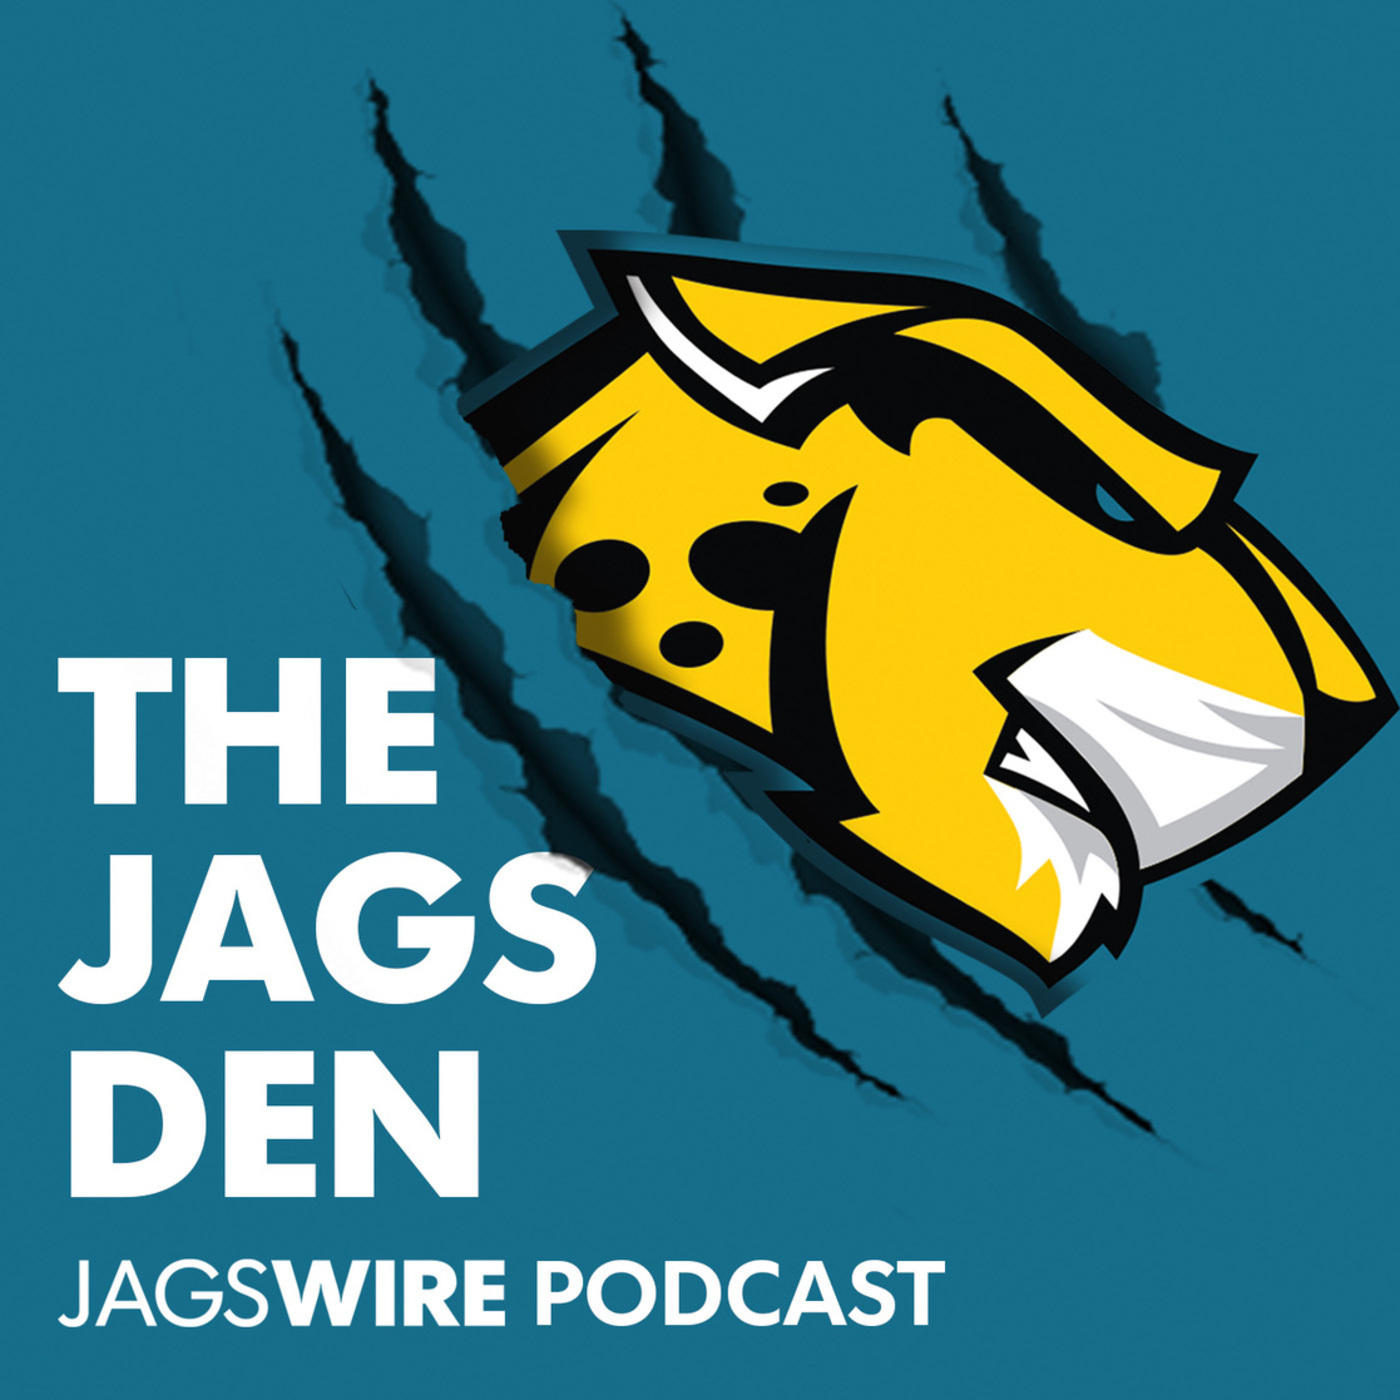 Jags Den Podcast Ep. 54: Thought on Ramsey's ESPN interview, Bengals win and more